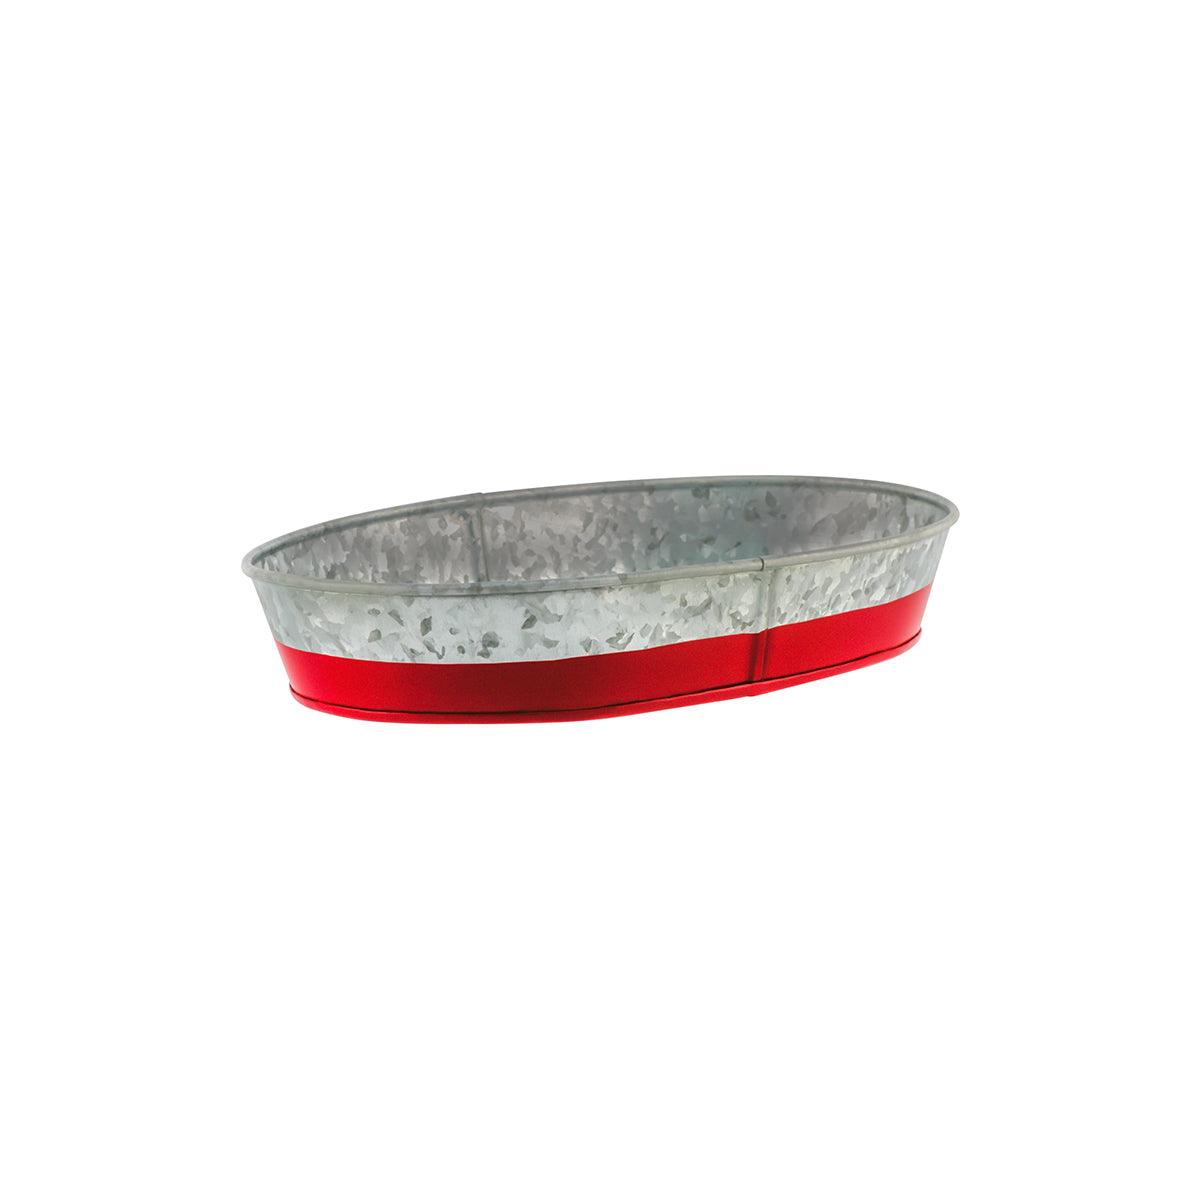 78662 Chef Inox Coney Island Oval Tray Galvanised with Red Base 275x185x45mm Tomkin Australia Hospitality Supplies